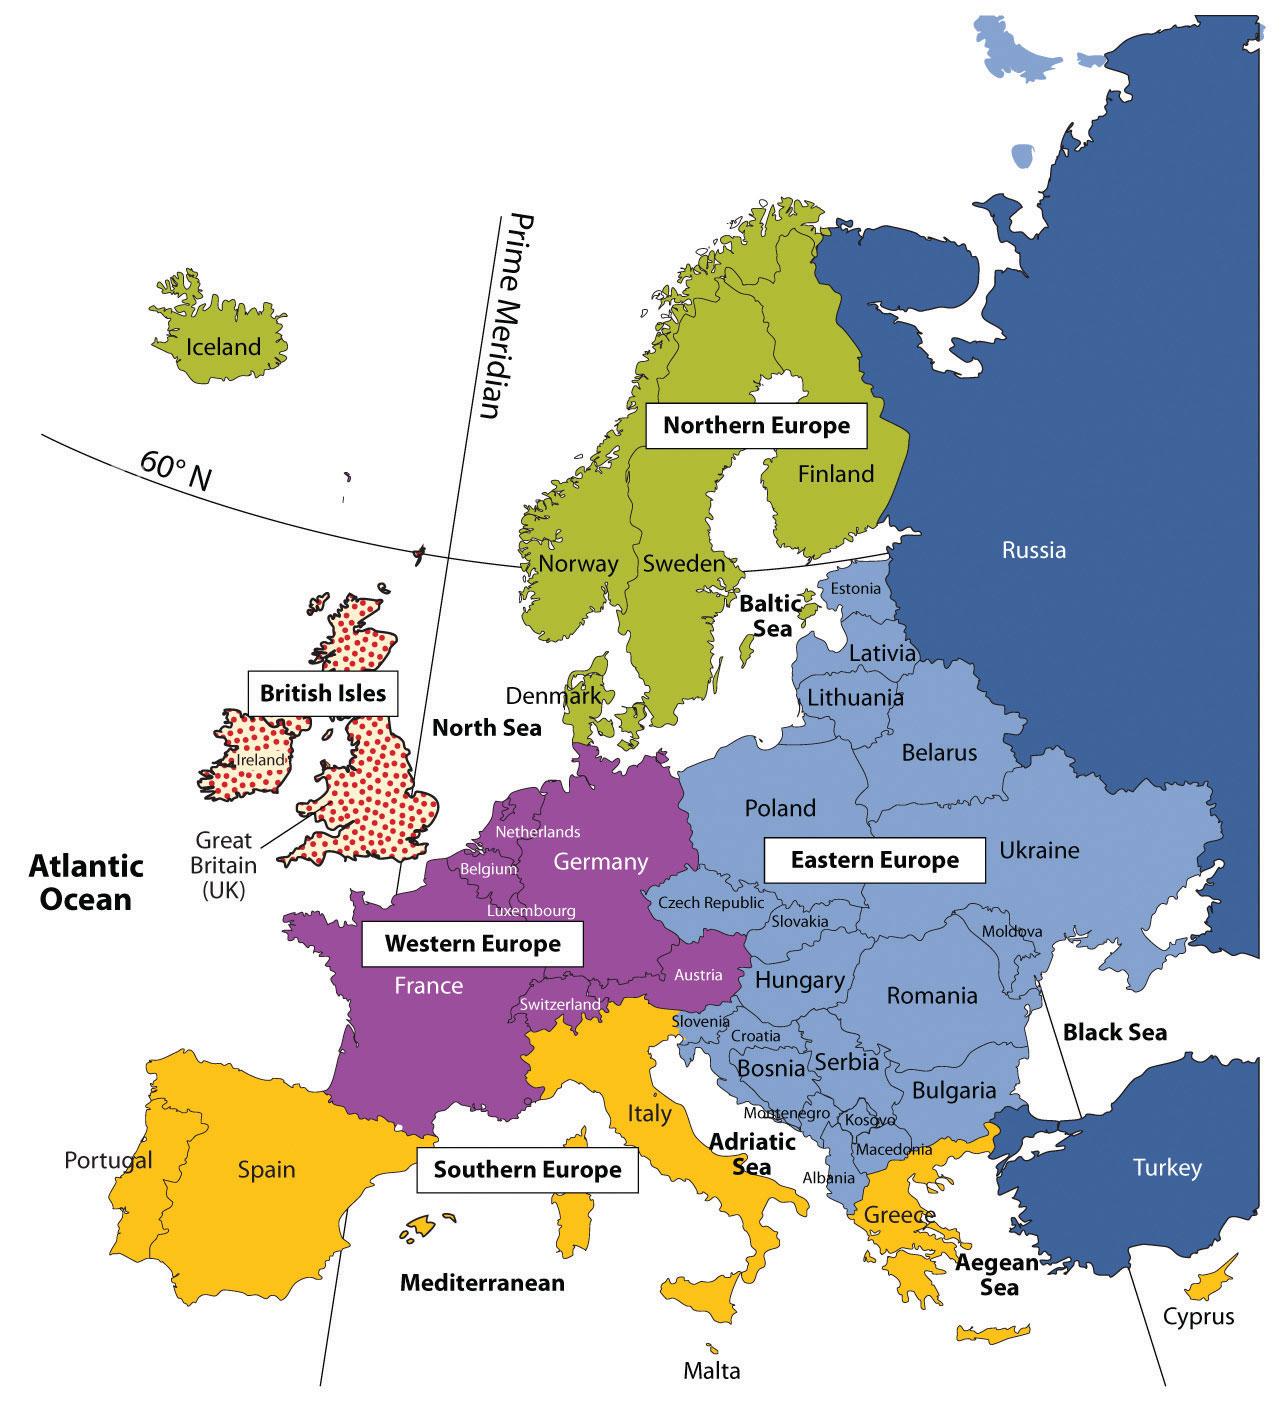 The European Realm and Its Regions